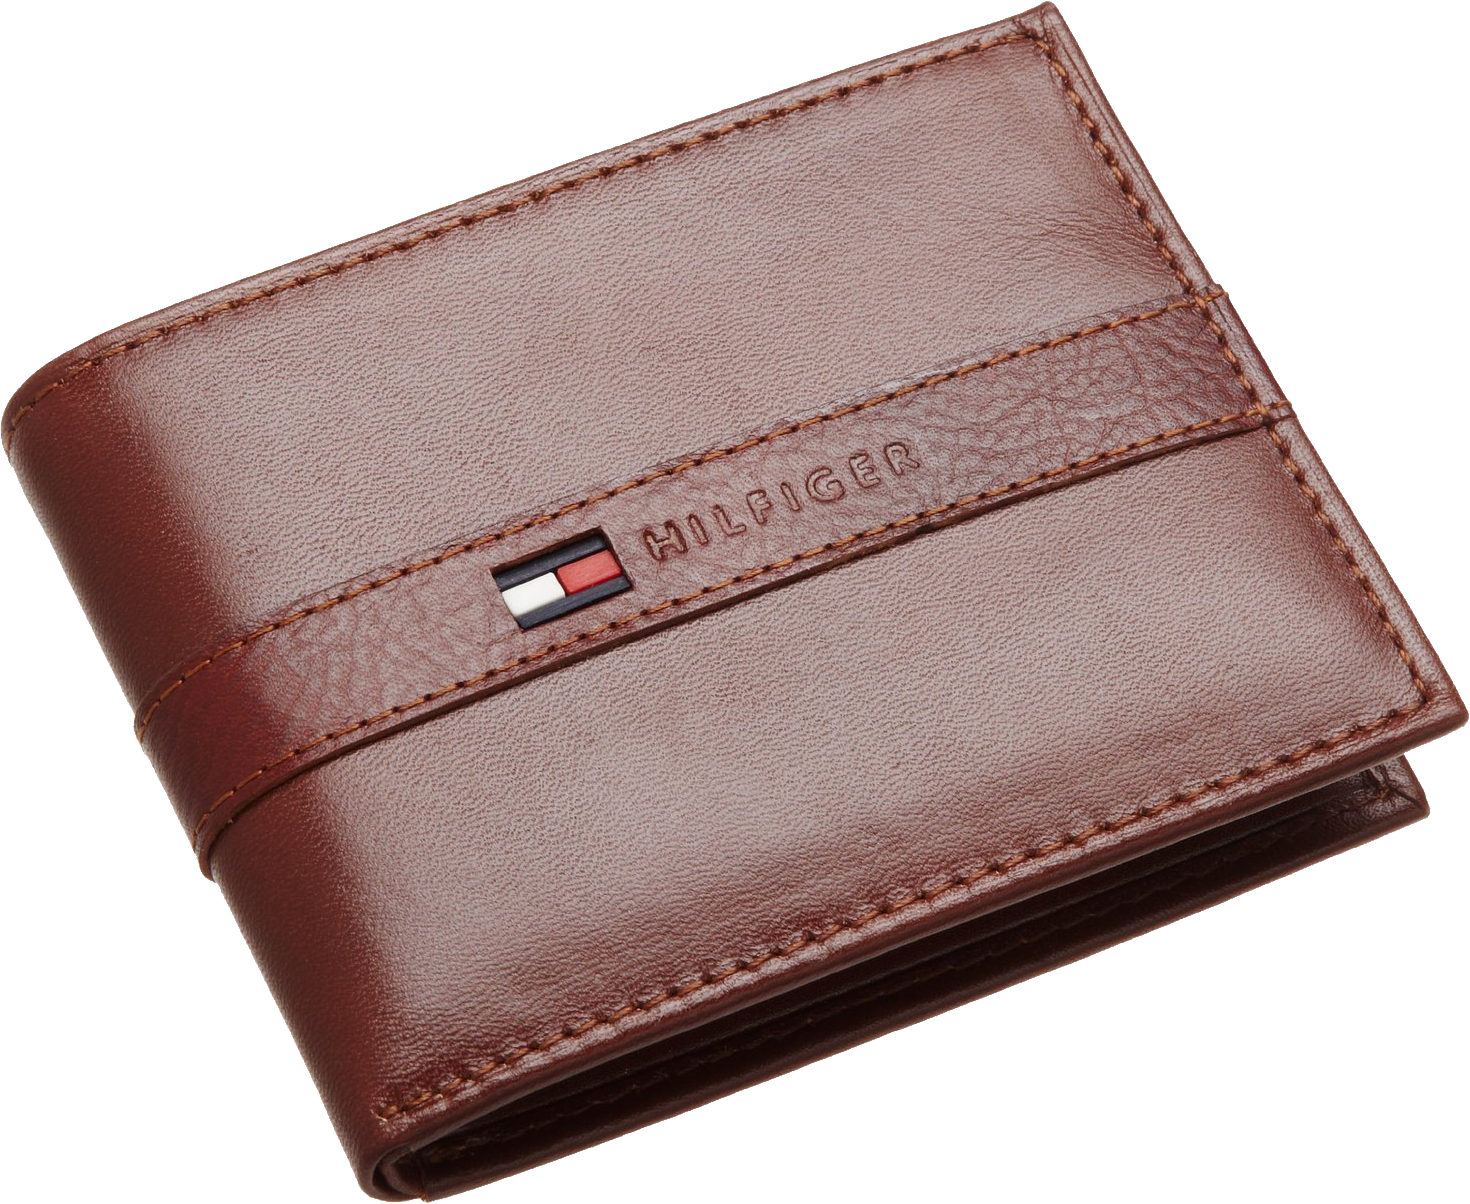 Brown leather wallet PNG image